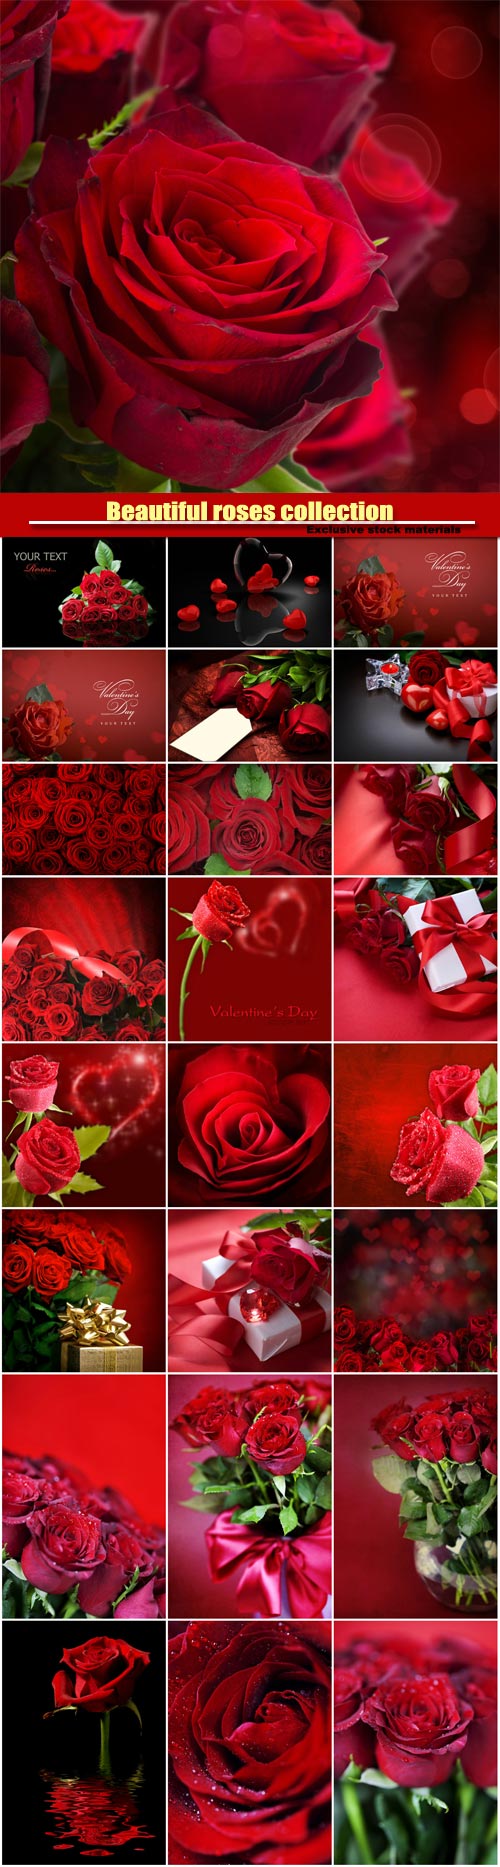 Beautiful roses, romantic collection backgrounds